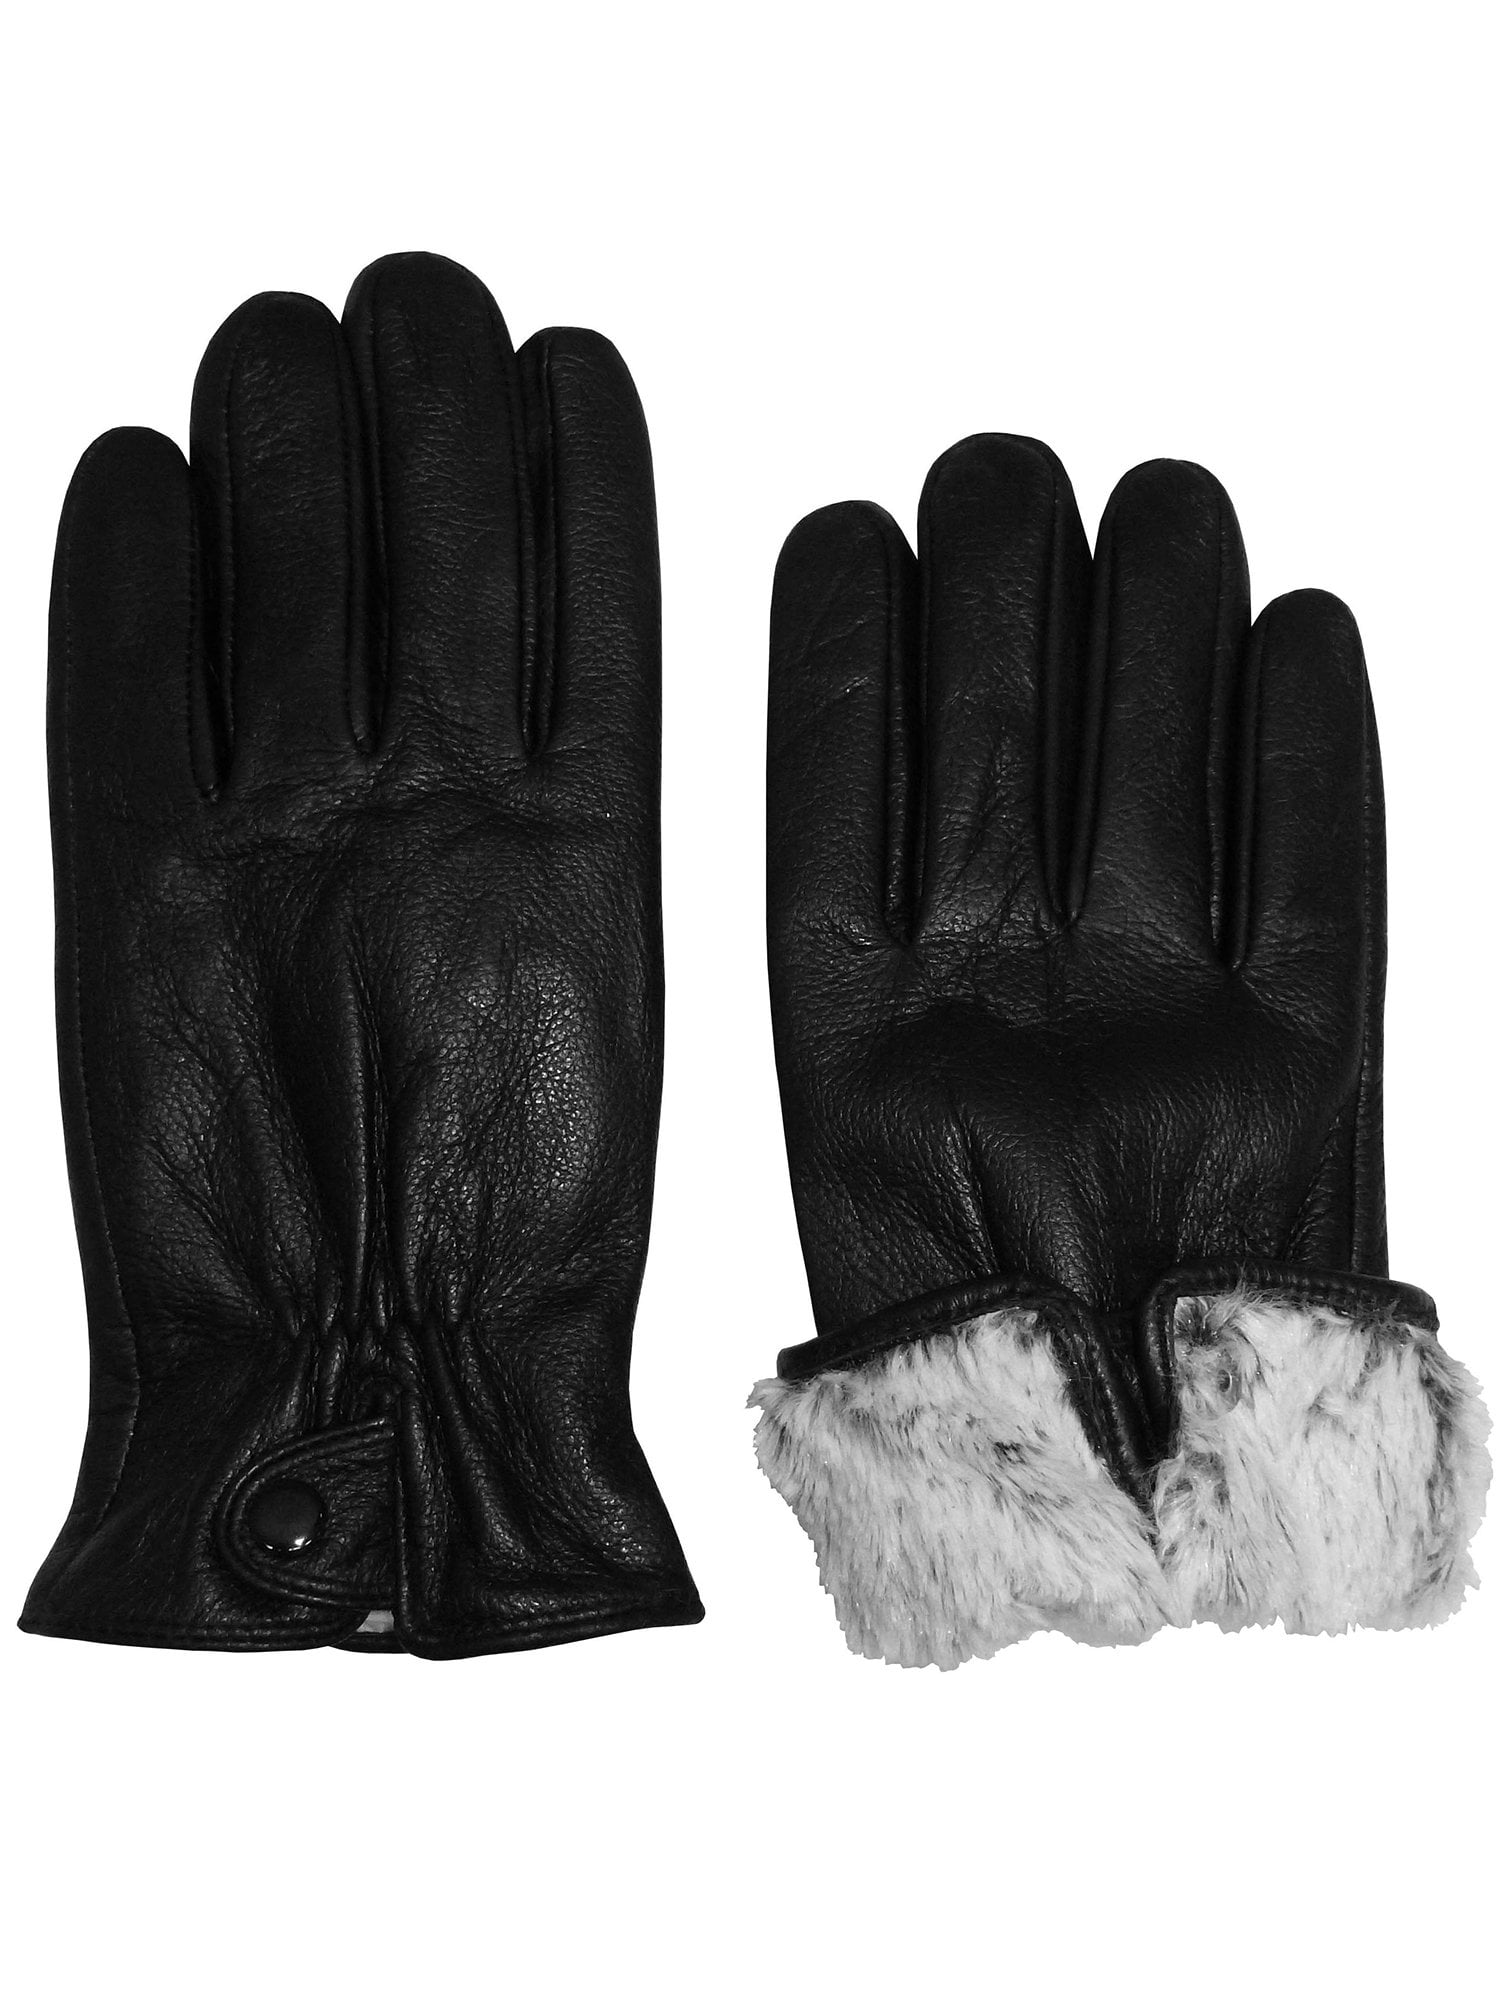 NICE CAPS Mens Adults Genuine Suede Leather Driving Winter Plush Lined Glove 